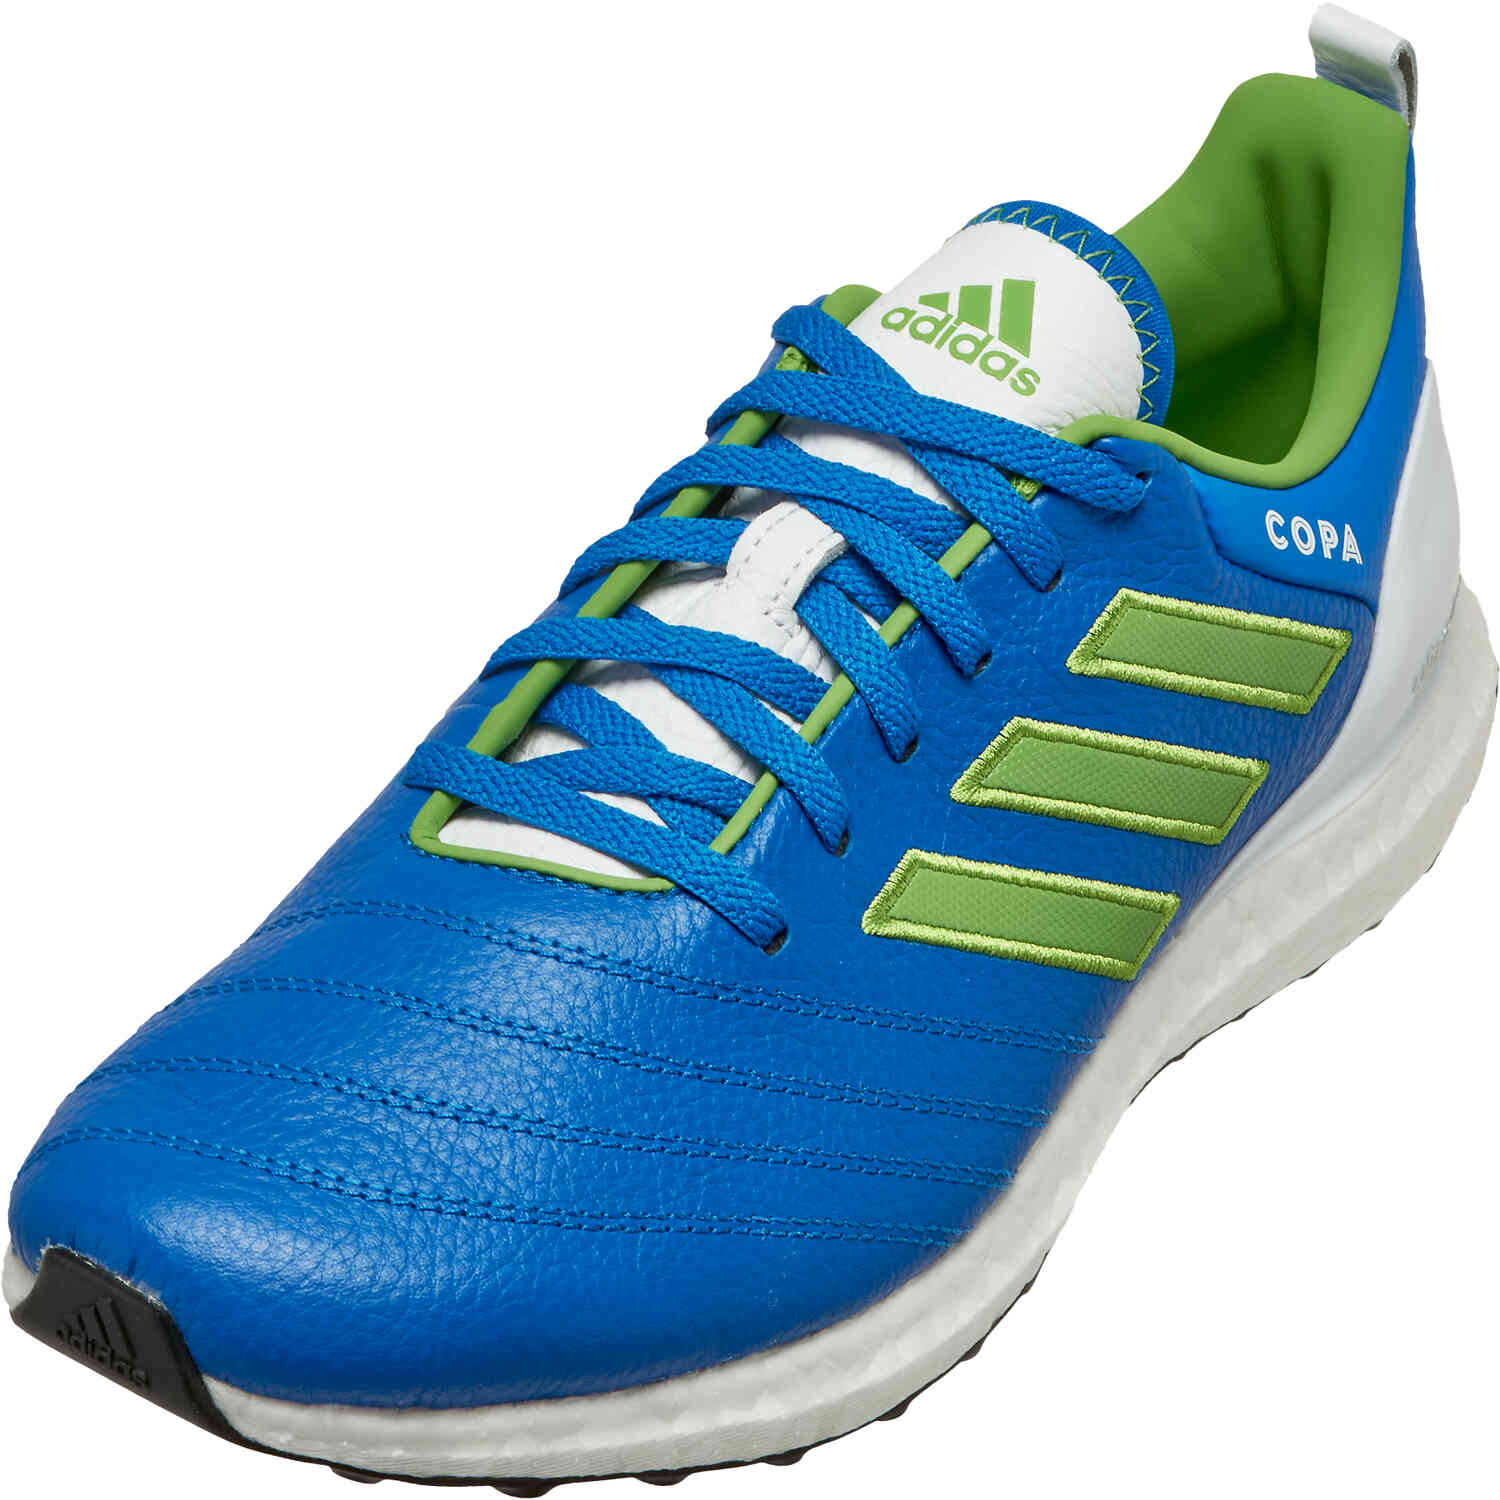 adidas Ultraboost x Copa Running Shoes - Seattle Sounders